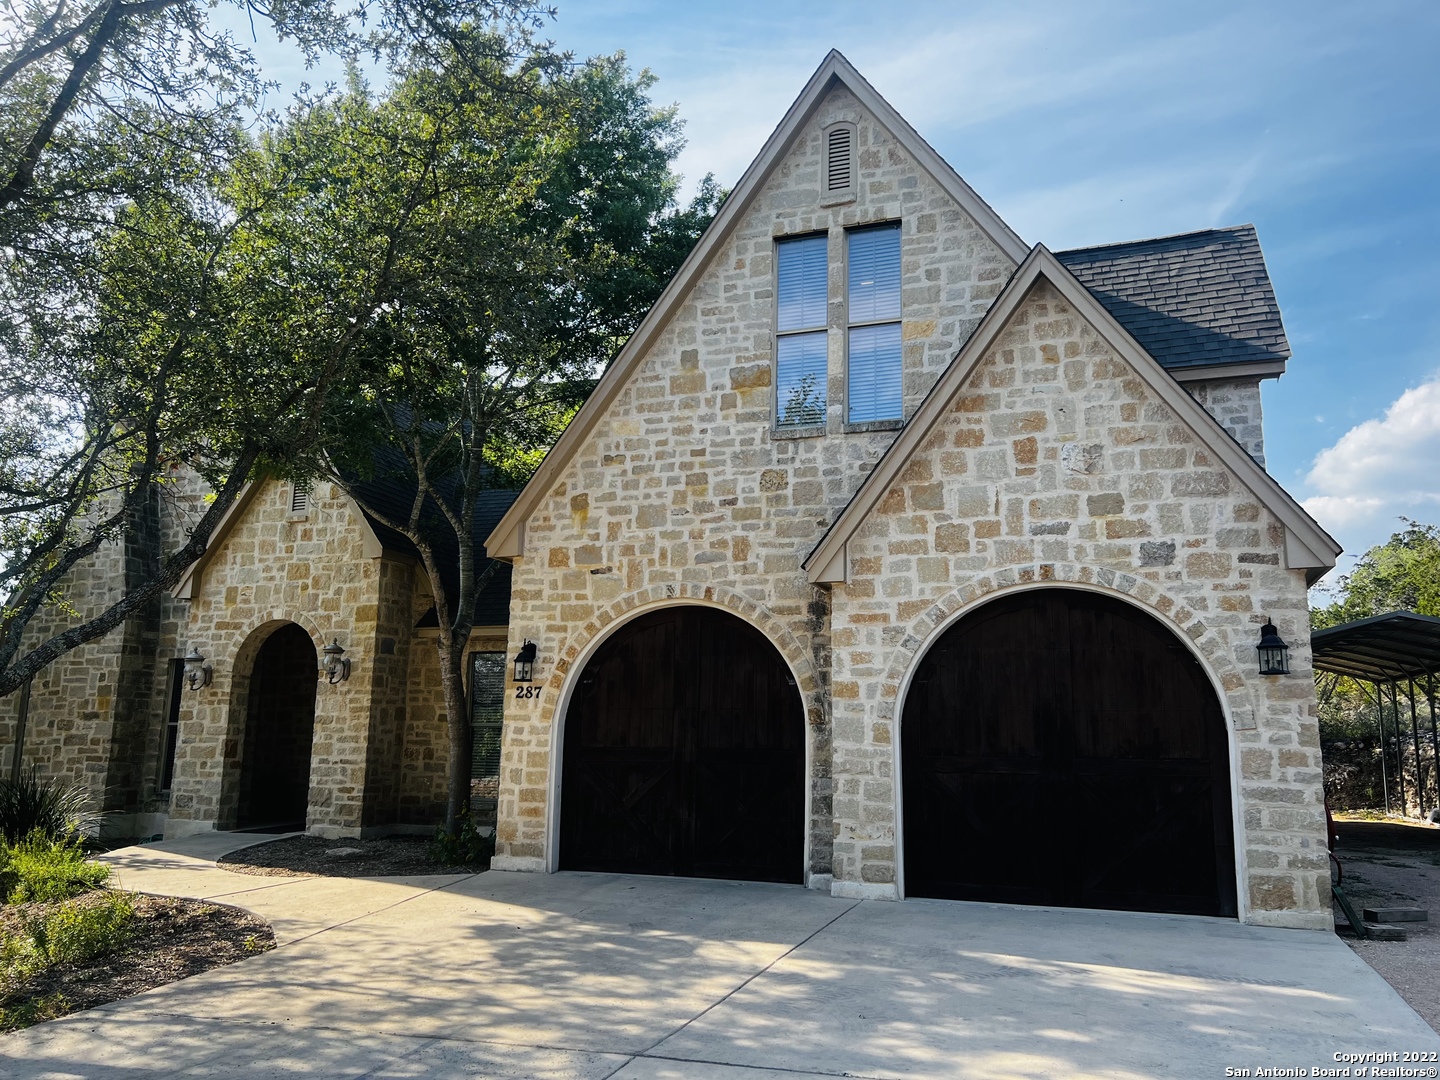 Motivated Sellers! Talk about location! This beautiful custom home sits on 2.58 acres in the gorgeous hill country setting of Laurel Canyon Ranch. The left side of the property is next to a Greenbelt with a wet weathered creek. A one of kind home that offers unique features inside and out while nestled in a community with a 10mile walking trail along a nature preserve. While the properties here have acreage with plenty of privacy, the LCR community participates in family picnics, hayrides, movie nights and many other neighborly gatherings. Venture into the fabulous stained concrete flooring with open concept kitchen and living room and a view of the pool, enjoy the well-crafted layout of the primary bedroom on one side with secondary rooms on the other, stairs to the second story made from Red Oak, upstairs boast a huge bonus/loft room that could be a 4th bedroom (has enough space for 2 bedrooms if you wanted) with a half bath (plenty room for guest accommodations), 2 fireplaces in the home, two-car double bay garage that is deep enough to fit 4 autos, approximately 1200 sqft patio space for entertaining, 50 amp RV hookup installed, a solid wood custom entry, cedar garage doors, and much more! Country living with a short 3 miles drive to Medina Lake, easy access to San Antonio and Bandera. Come experience this little kept secret of a gem before someone else does.